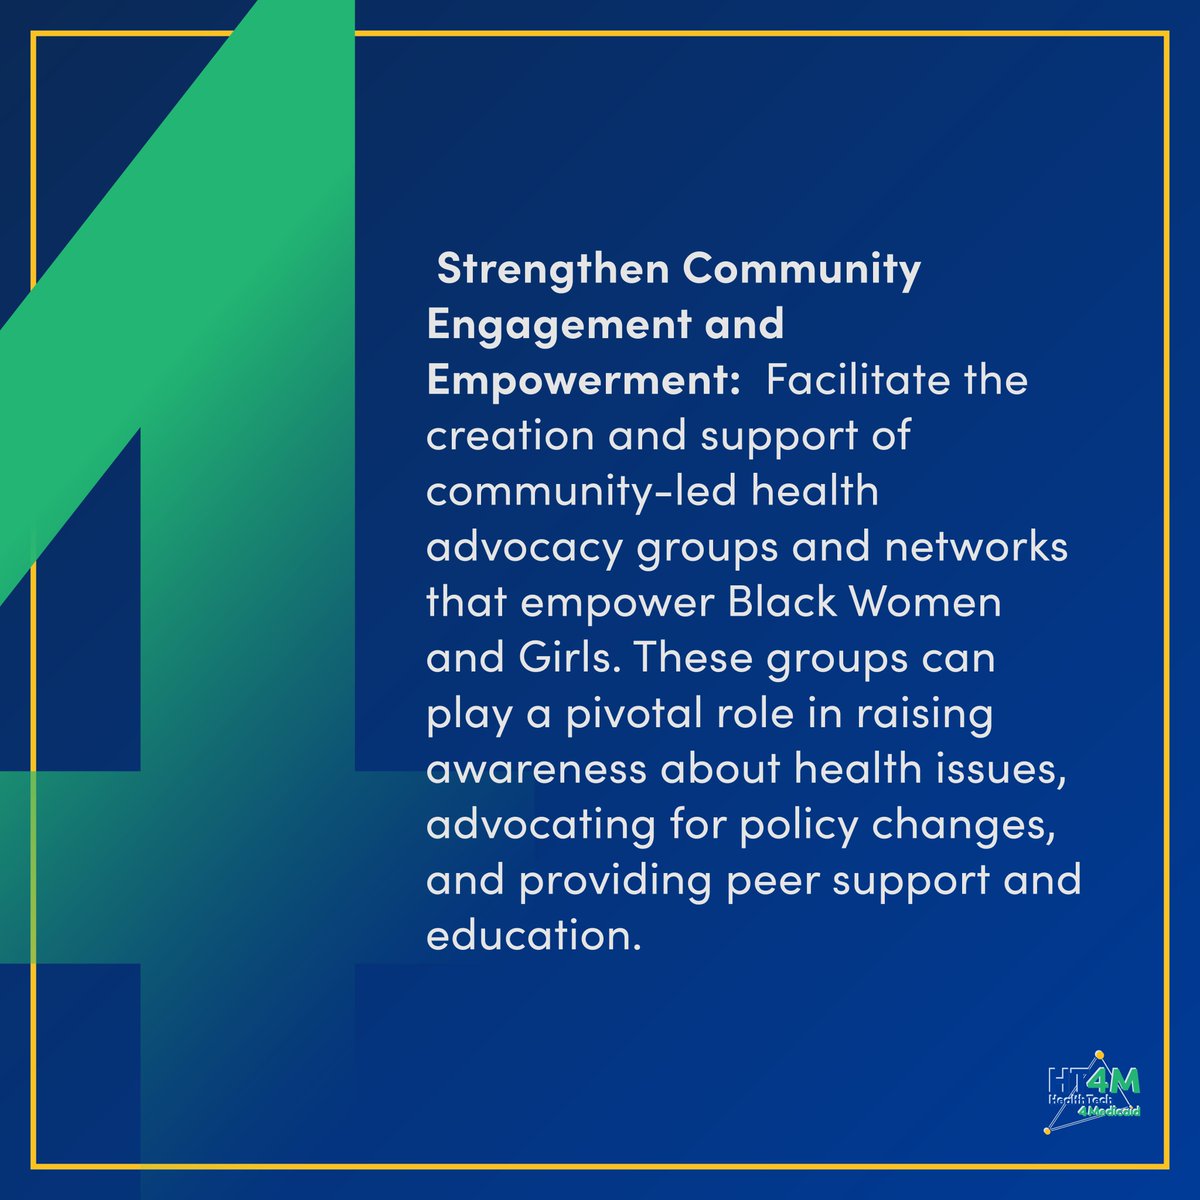 Recognizing our health equity heroes, we're sharing Kellie Todd Griffin's 4 calls to action for advancing health equity in vulnerable populations. Let's act together as a community! #HealthEquity #CallToAction #CommunityAction